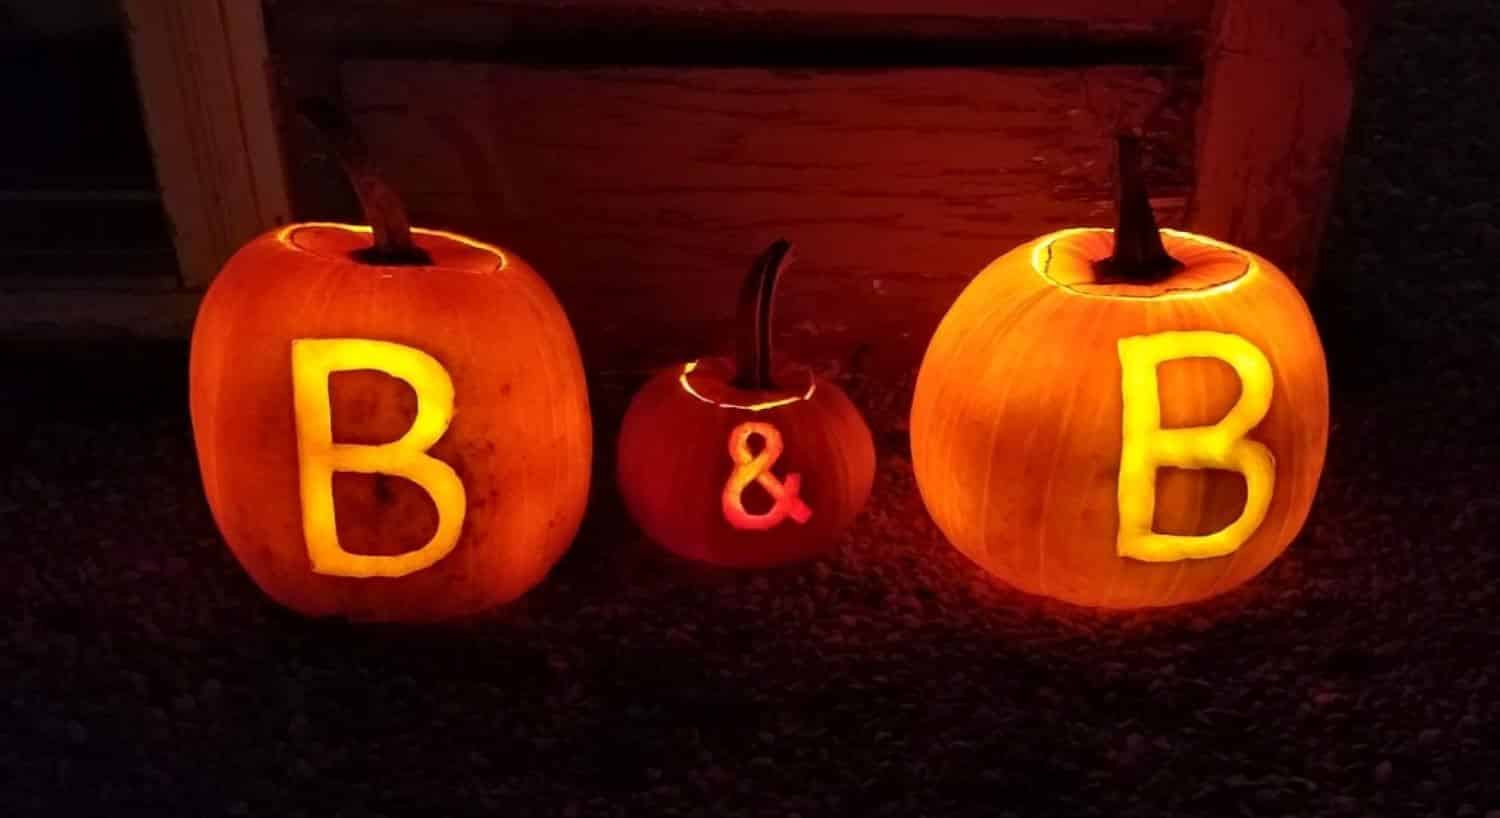 Halloween pumpkins lighted up at night with the letters B & B